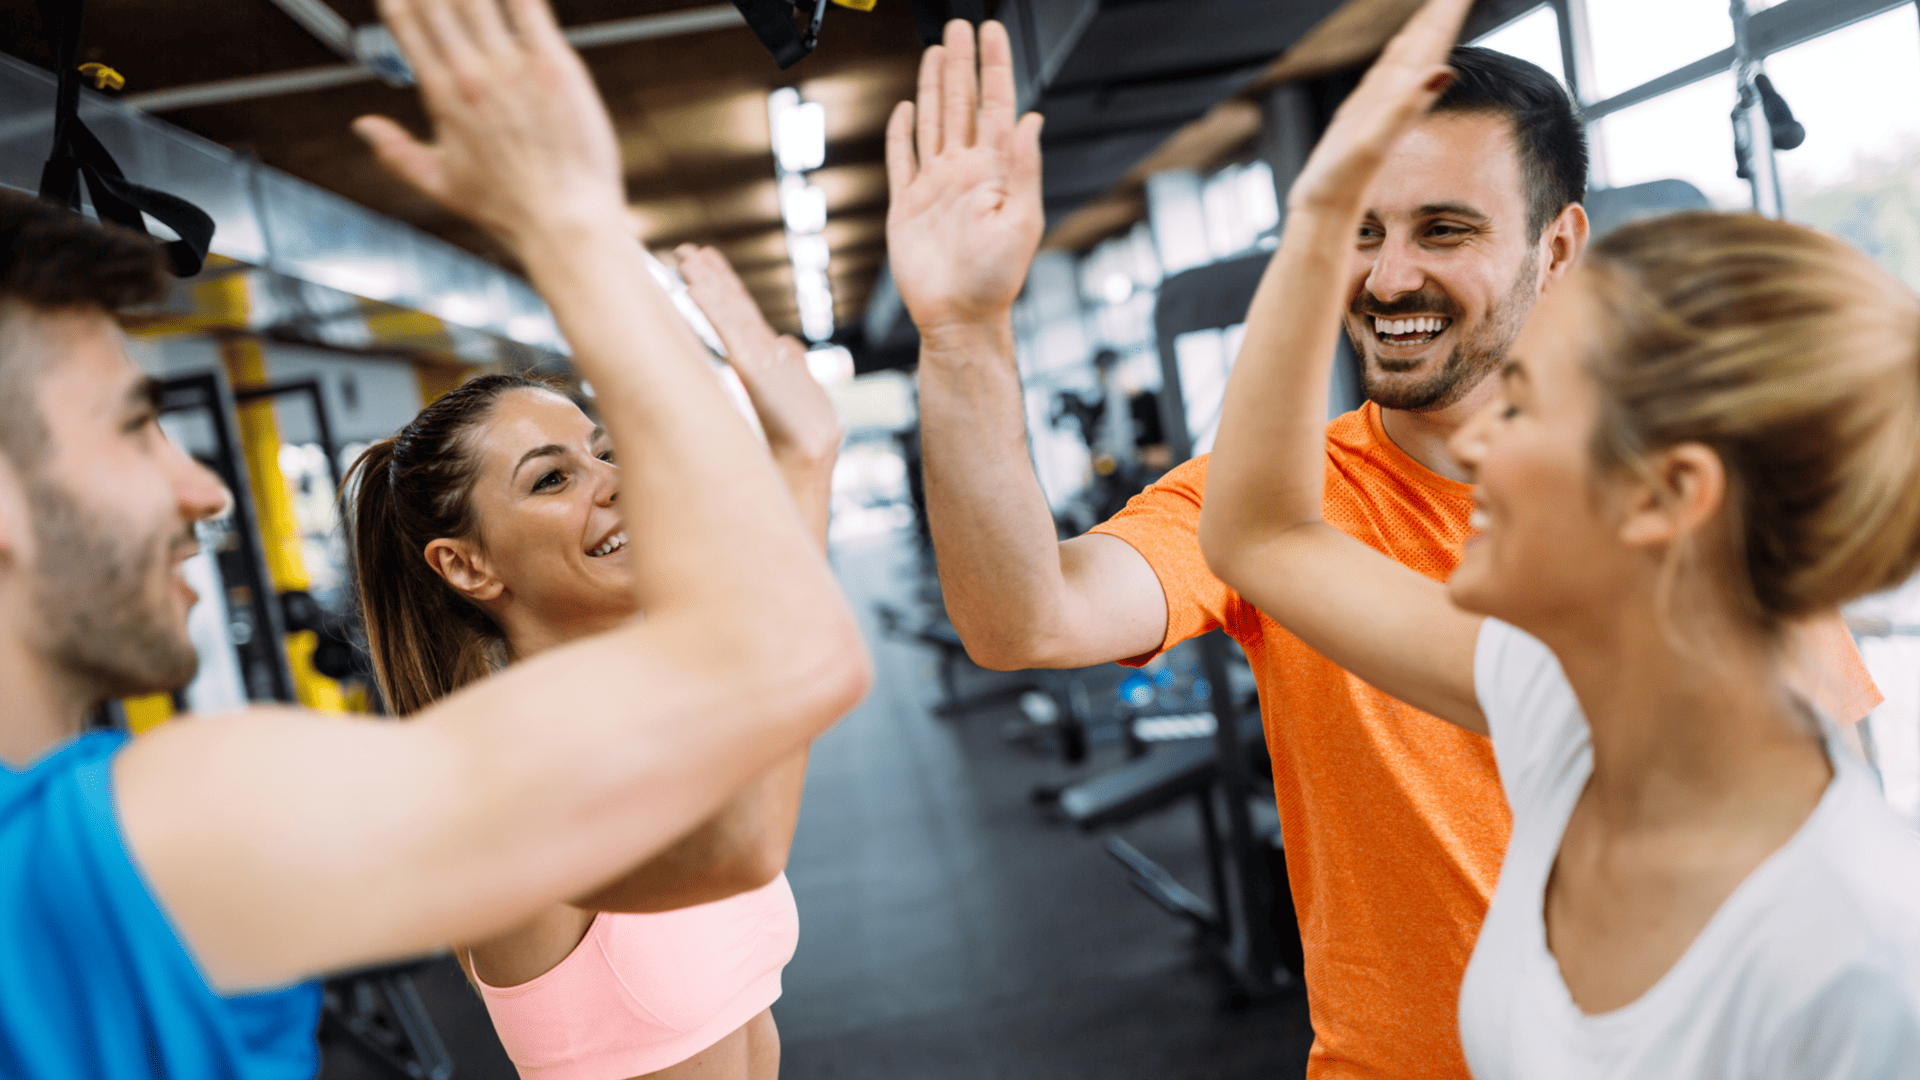 Staff Training and Development: How to Invest in Your Gym’s Team